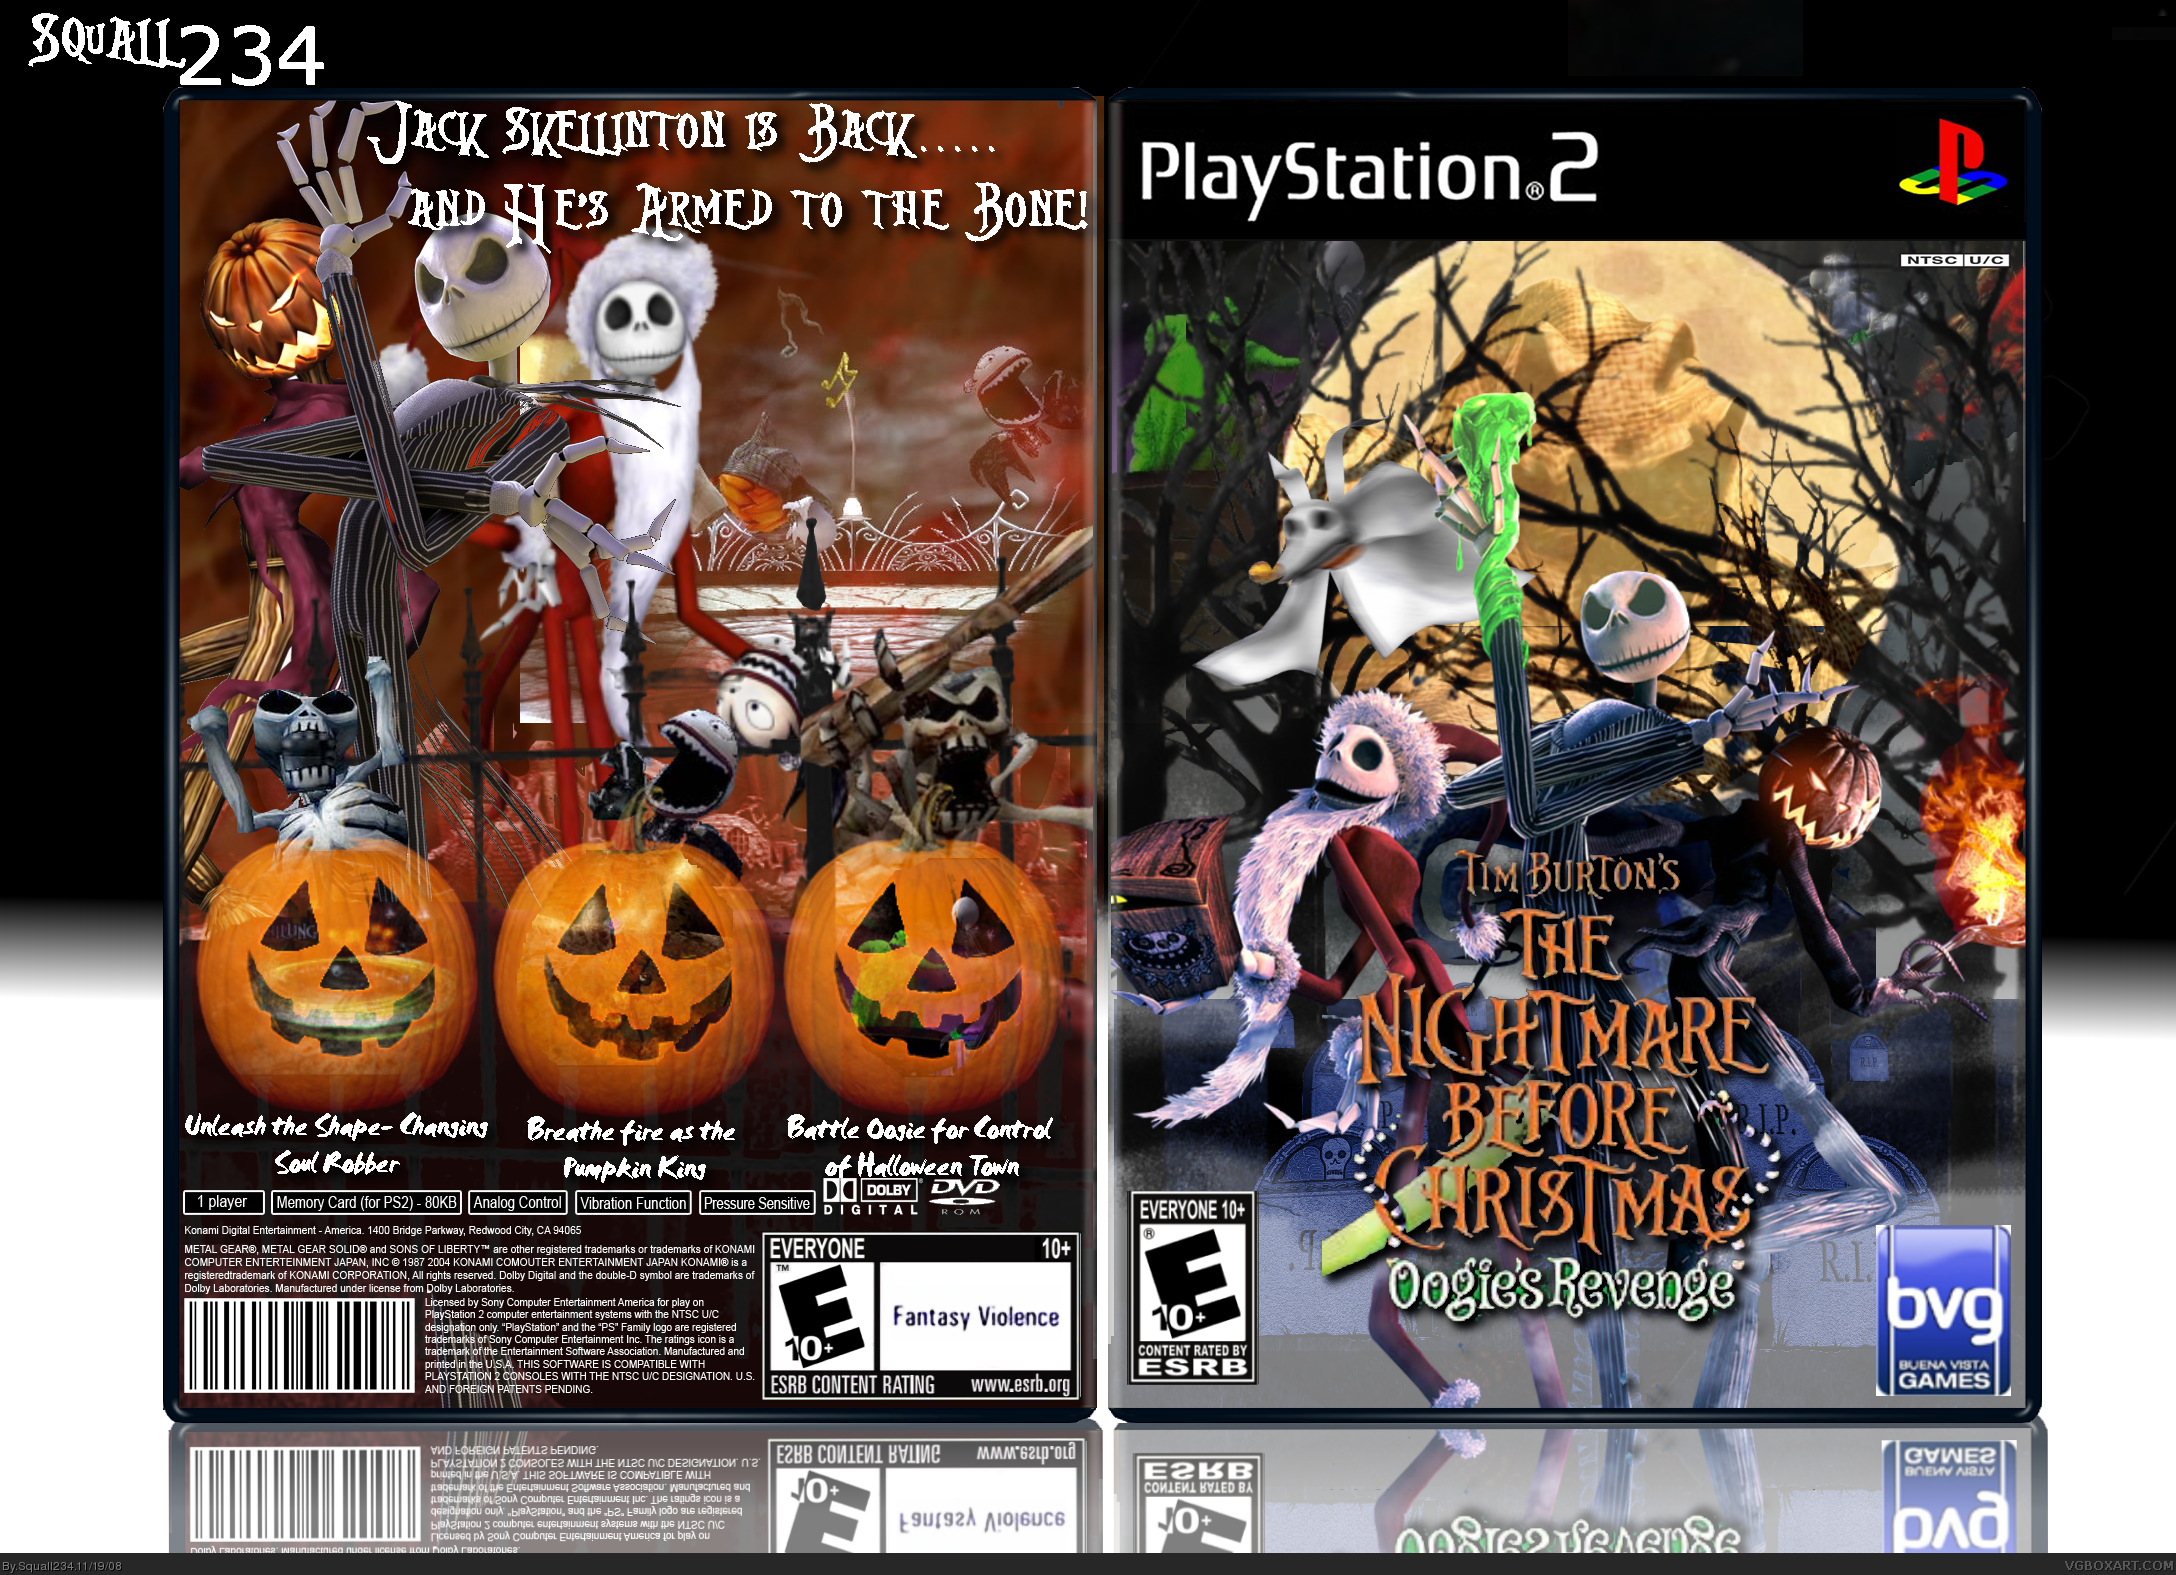 The Nightmare Before Christmas: Oogie's Revenge box cover